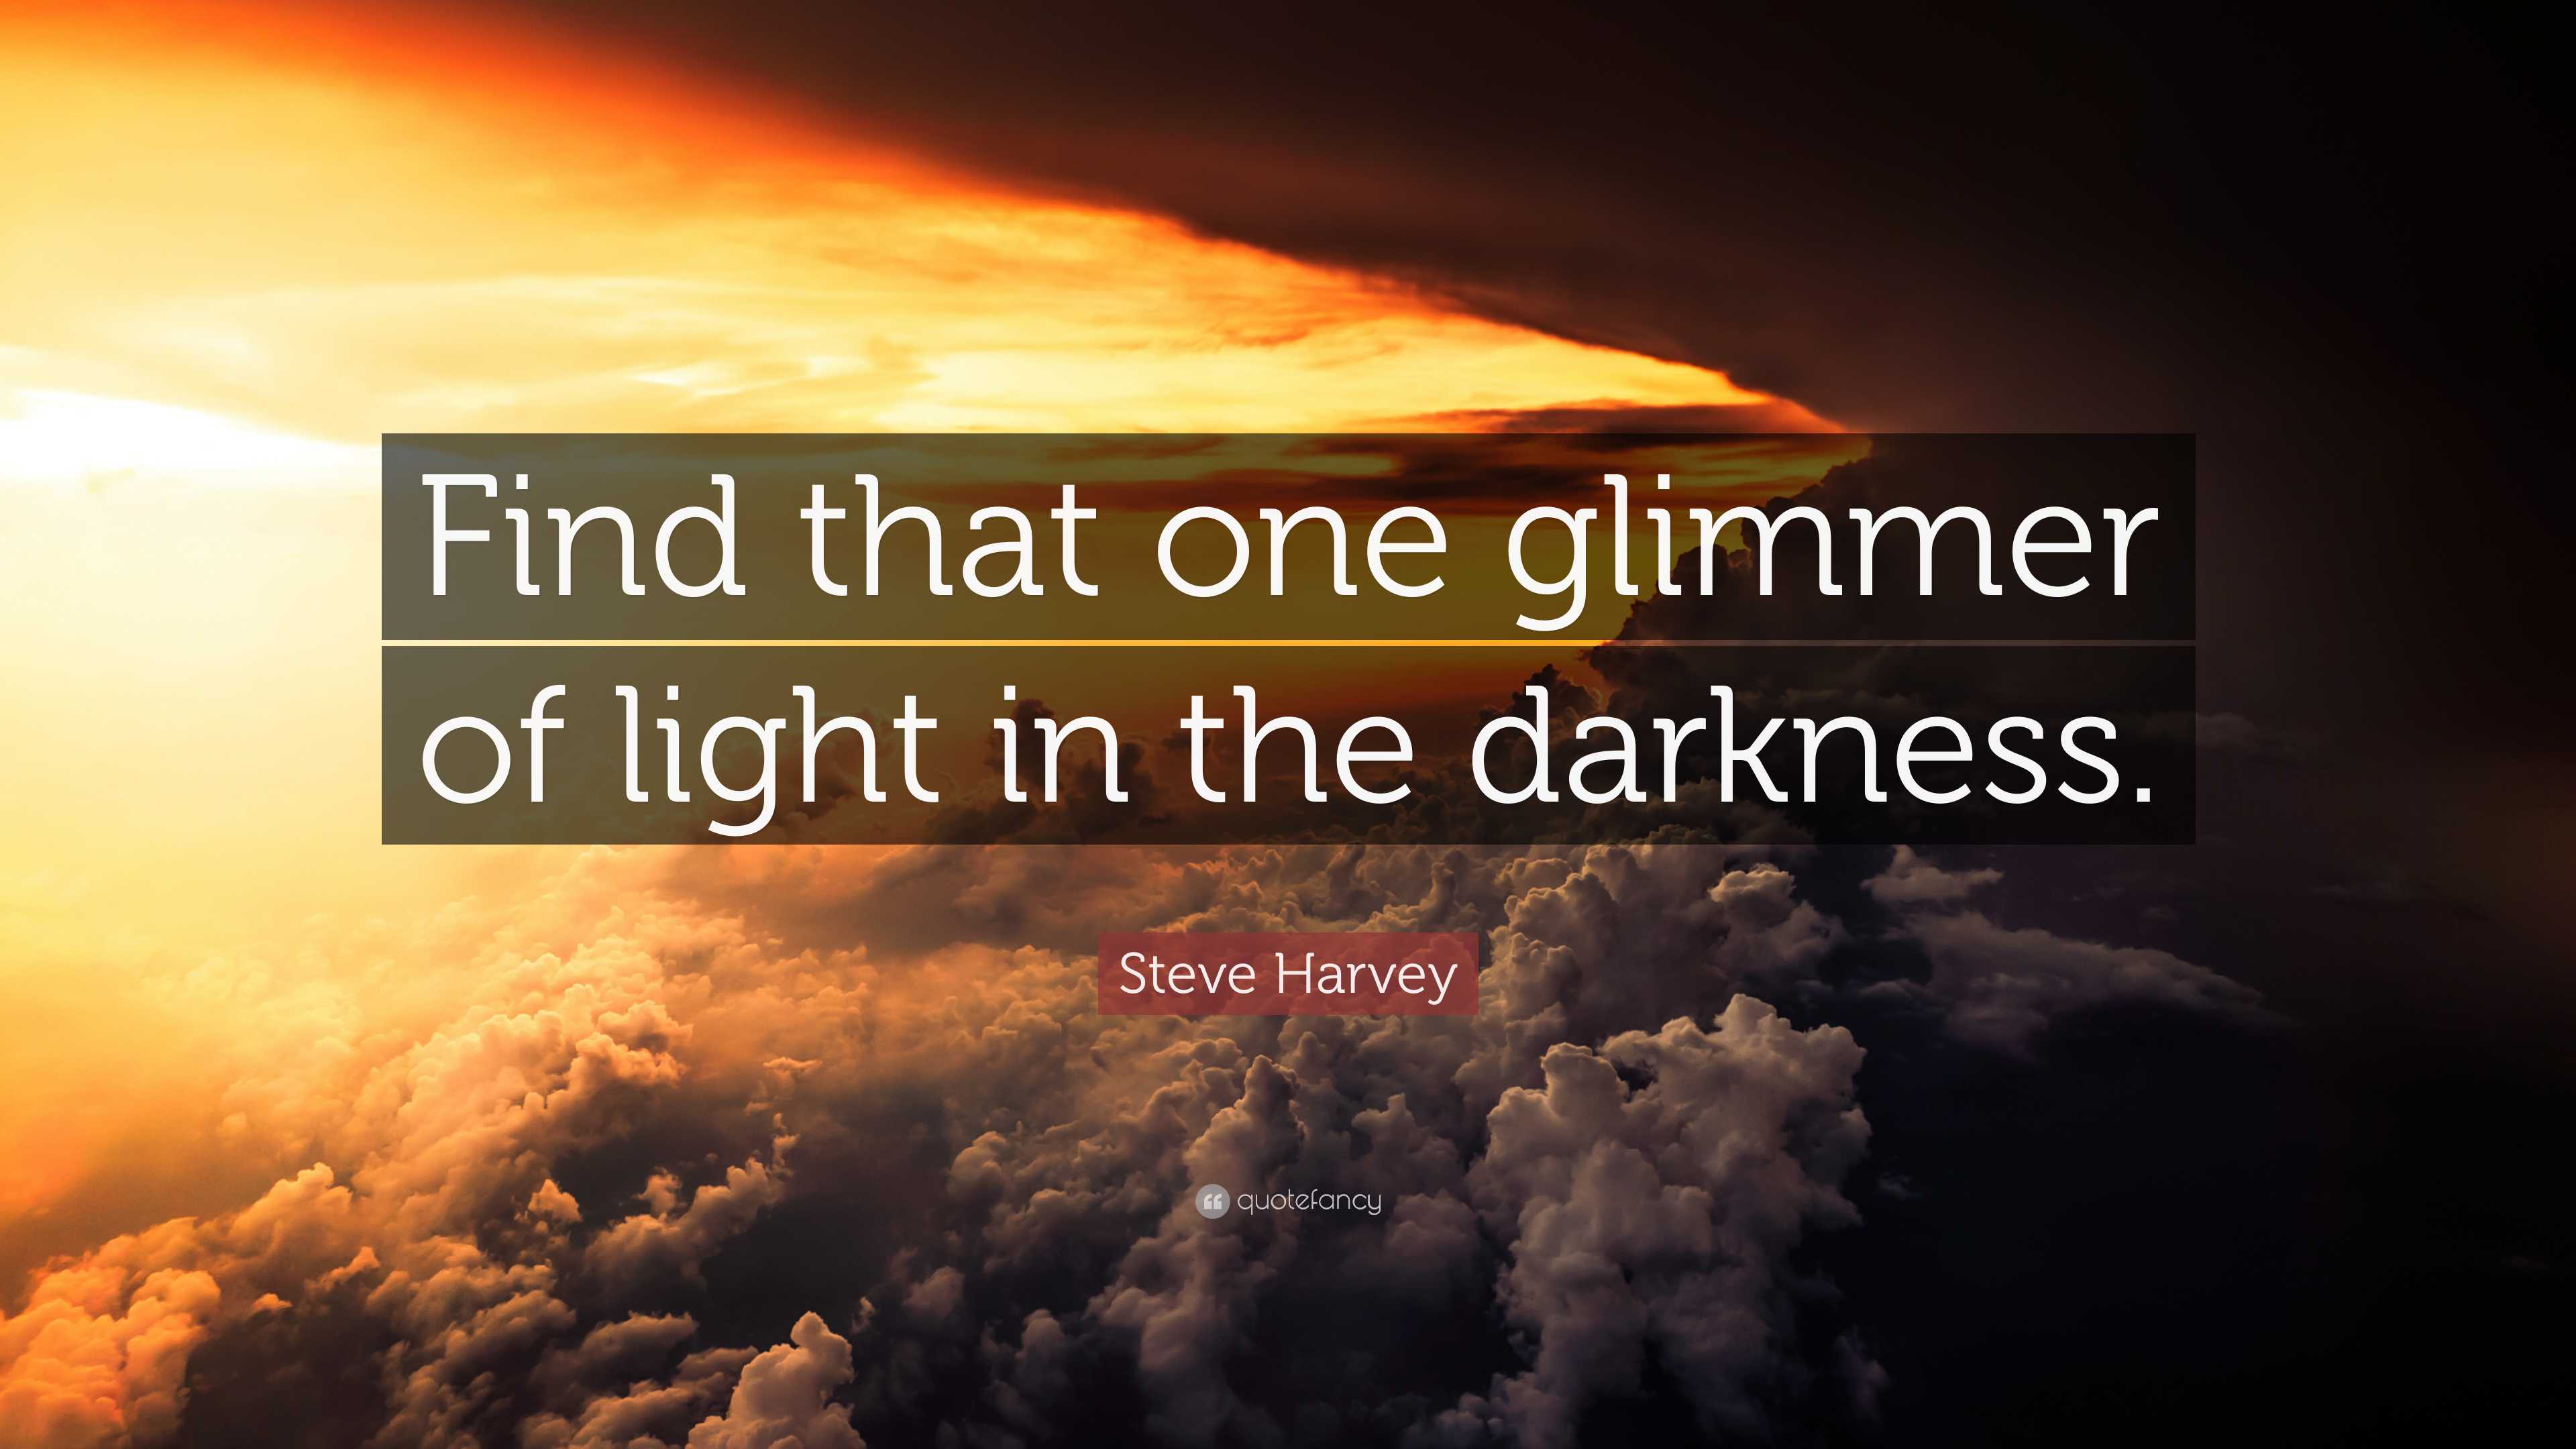 Steve Harvey Quote: “Find that one glimmer of light in the darkness.”